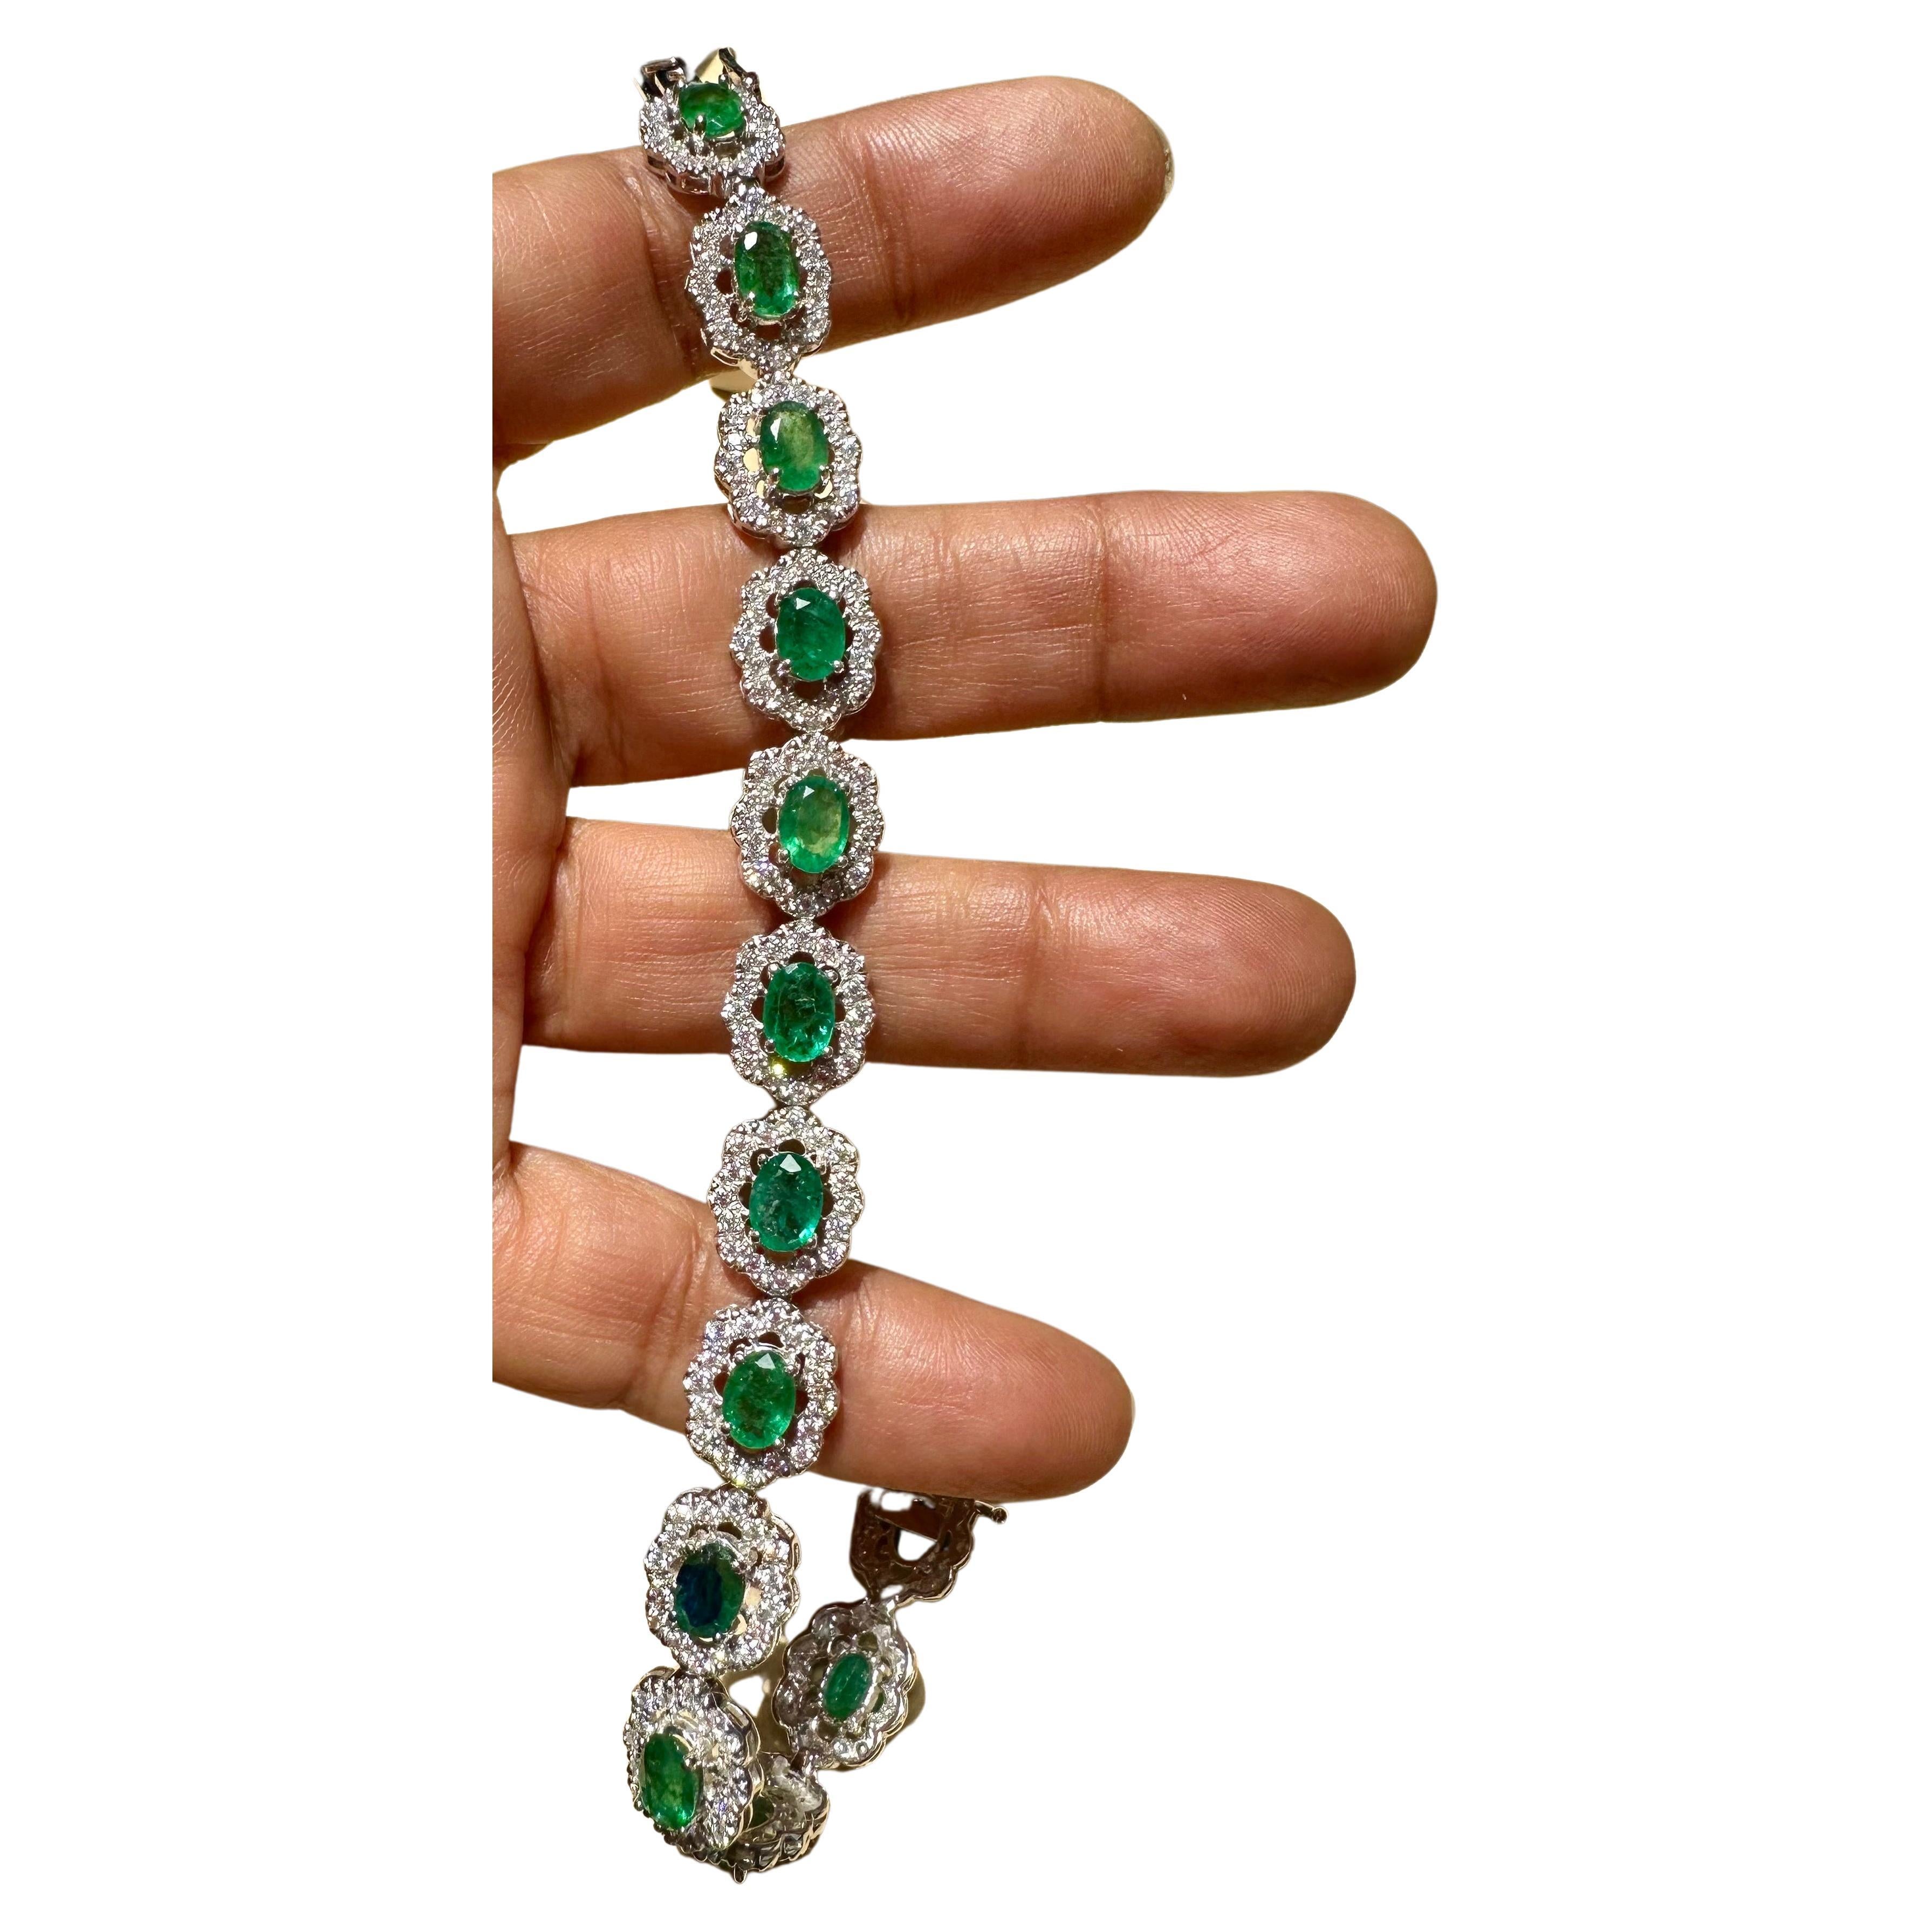 10 Carat Natural Brazilian Emerald & Diamond Tennis Bracelet 14 Karat Gold
 This exceptionally affordable Tennis  bracelet has  13 stones of oval  Emeralds  . Each Emerald is surrounded by  diamonds . Total weight of the Emeralds is  approximately